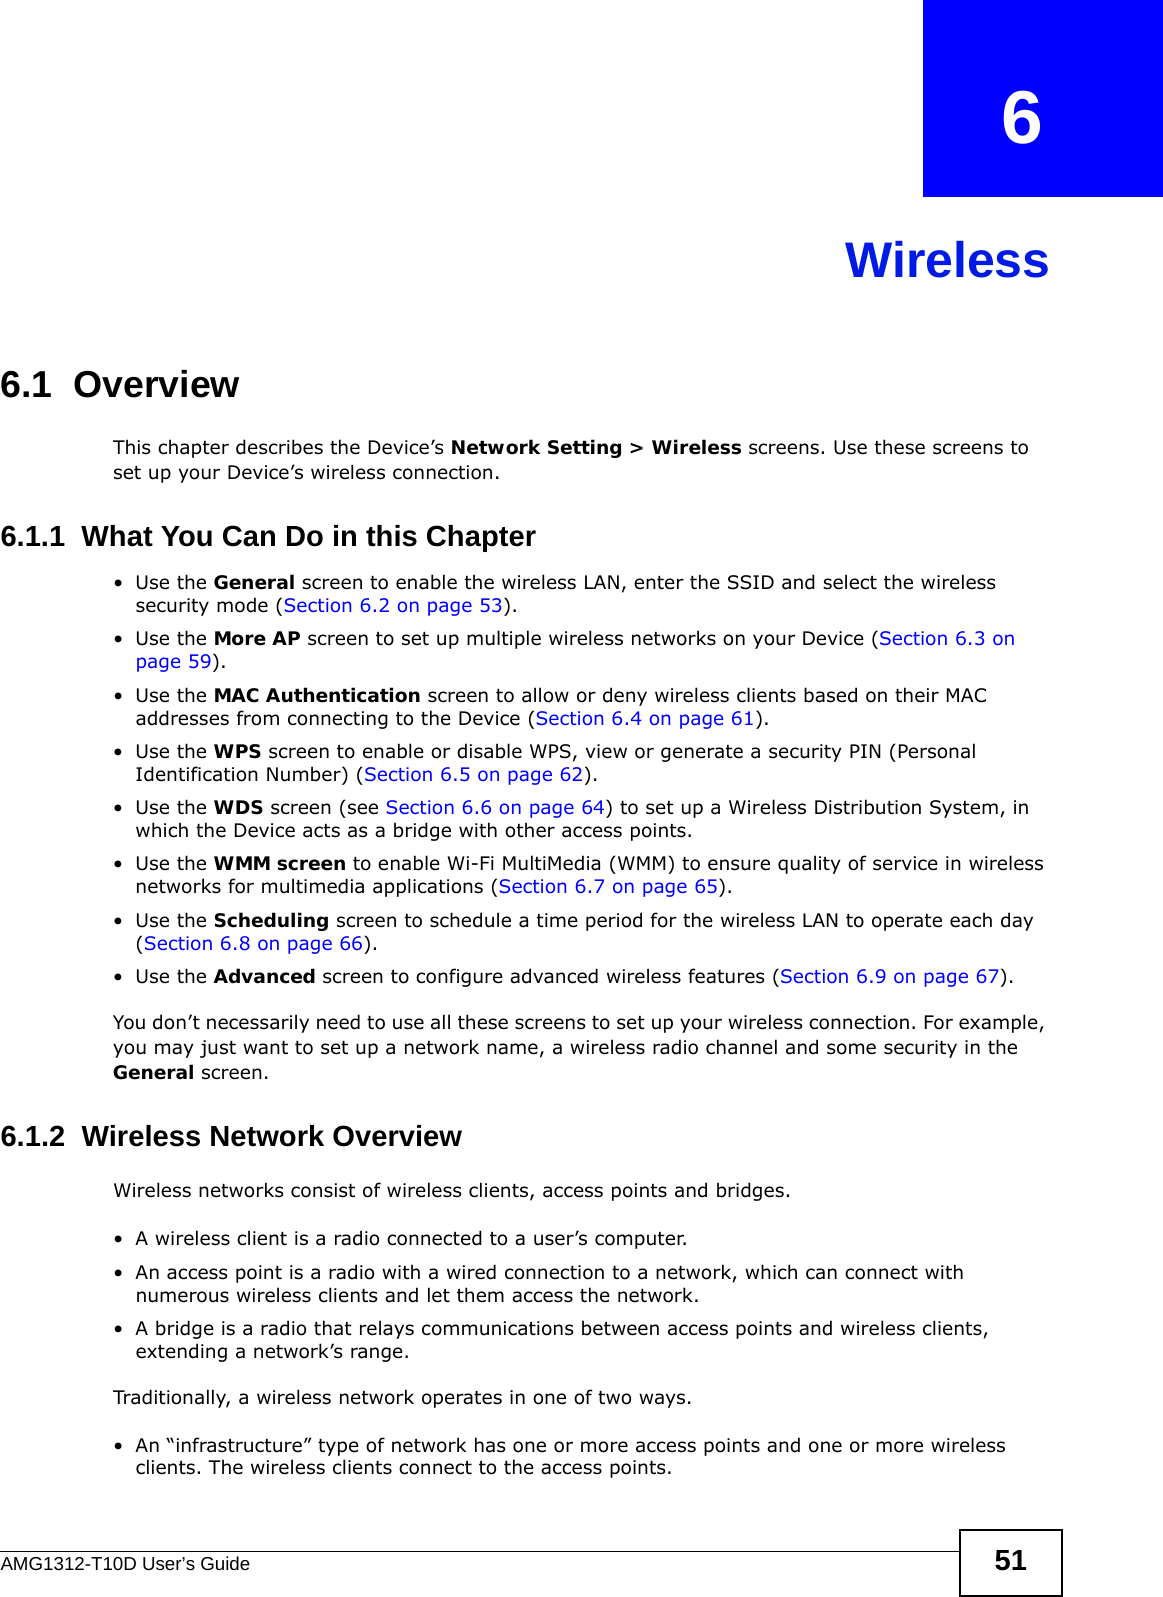 AMG1312-T10D User’s Guide 51CHAPTER   6Wireless6.1  Overview This chapter describes the Device’s Network Setting &gt; Wireless screens. Use these screens to set up your Device’s wireless connection.6.1.1  What You Can Do in this Chapter•Use the General screen to enable the wireless LAN, enter the SSID and select the wireless security mode (Section 6.2 on page 53).•Use the More AP screen to set up multiple wireless networks on your Device (Section 6.3 on page 59).•Use the MAC Authentication screen to allow or deny wireless clients based on their MAC addresses from connecting to the Device (Section 6.4 on page 61).•Use the WPS screen to enable or disable WPS, view or generate a security PIN (Personal Identification Number) (Section 6.5 on page 62).•Use the WDS screen (see Section 6.6 on page 64) to set up a Wireless Distribution System, in which the Device acts as a bridge with other access points.•Use the WMM screen to enable Wi-Fi MultiMedia (WMM) to ensure quality of service in wireless networks for multimedia applications (Section 6.7 on page 65). •Use the Scheduling screen to schedule a time period for the wireless LAN to operate each day (Section 6.8 on page 66).•Use the Advanced screen to configure advanced wireless features (Section 6.9 on page 67).You don’t necessarily need to use all these screens to set up your wireless connection. For example, you may just want to set up a network name, a wireless radio channel and some security in the General screen.6.1.2  Wireless Network OverviewWireless networks consist of wireless clients, access points and bridges. • A wireless client is a radio connected to a user’s computer. • An access point is a radio with a wired connection to a network, which can connect with numerous wireless clients and let them access the network. • A bridge is a radio that relays communications between access points and wireless clients, extending a network’s range. Traditionally, a wireless network operates in one of two ways.• An “infrastructure” type of network has one or more access points and one or more wireless clients. The wireless clients connect to the access points.